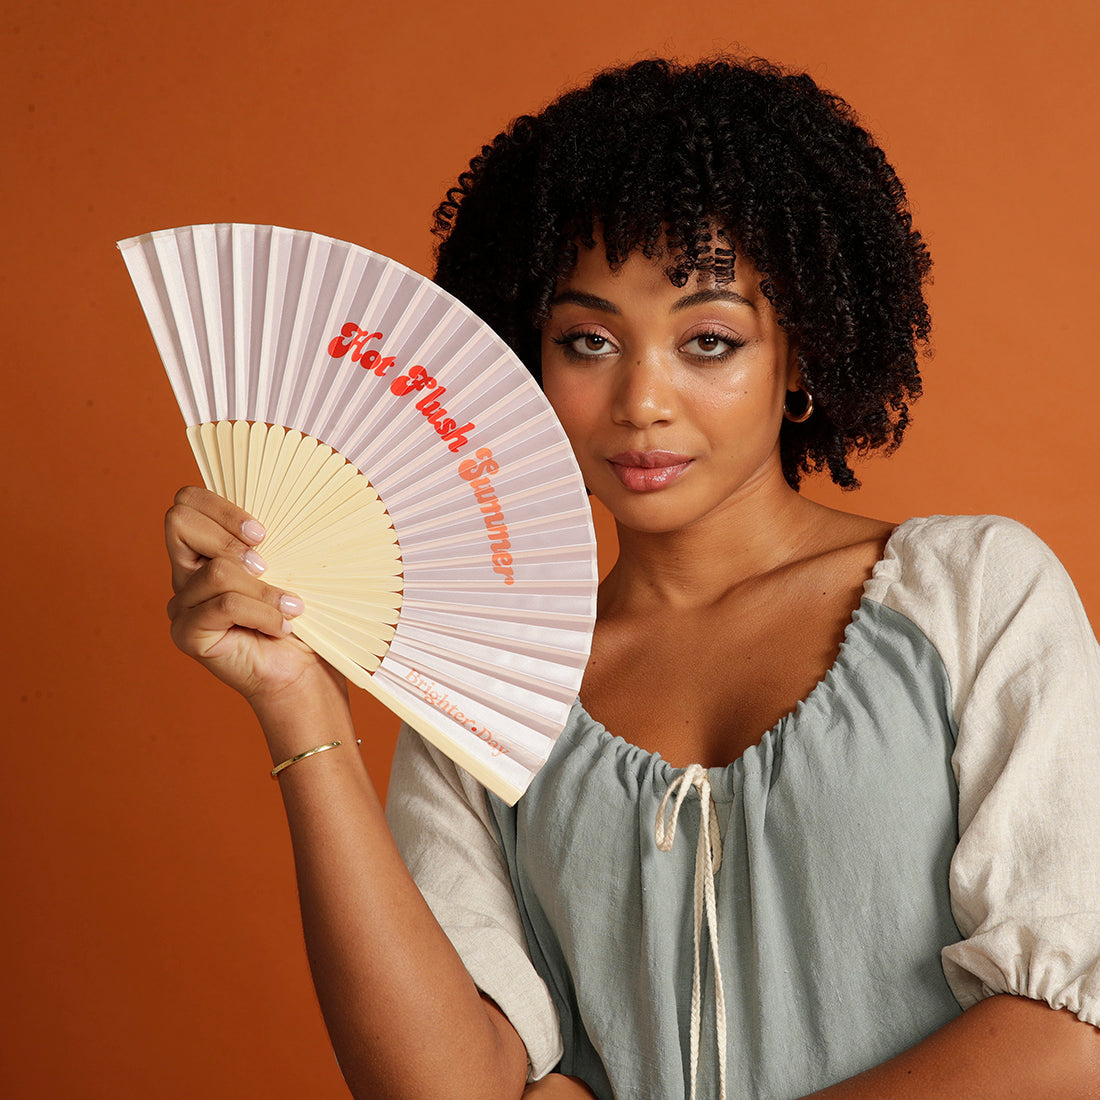 Curly haired woman holding pink Hot Flush Summer Fan too her face